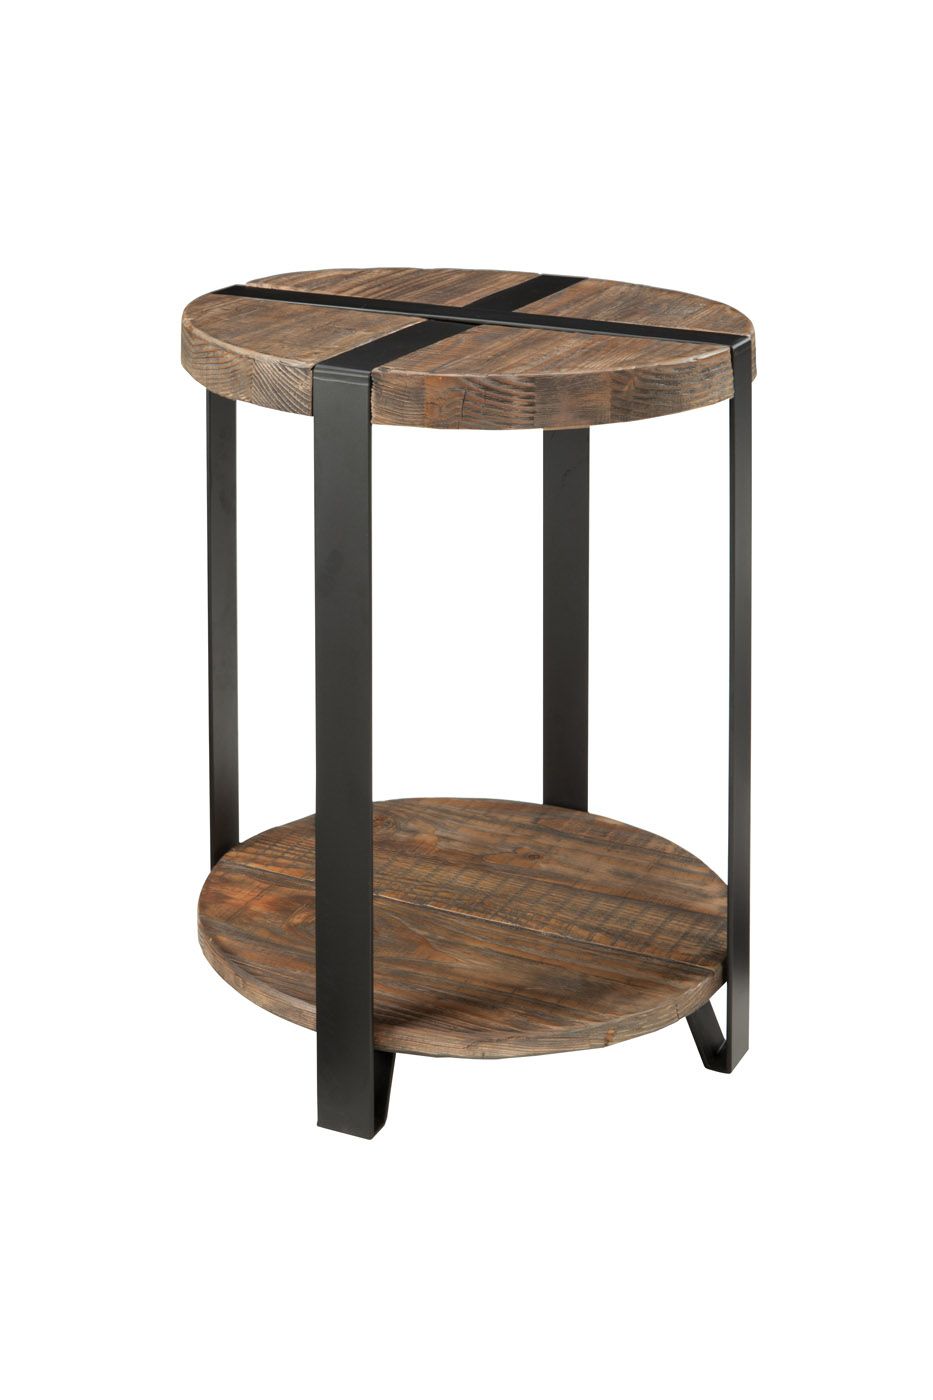 the modesto round accent table perfect for any small space this rustic inch diameter offers two useful levels metal bands are flush with end tables ikea ceramic outdoor side wall